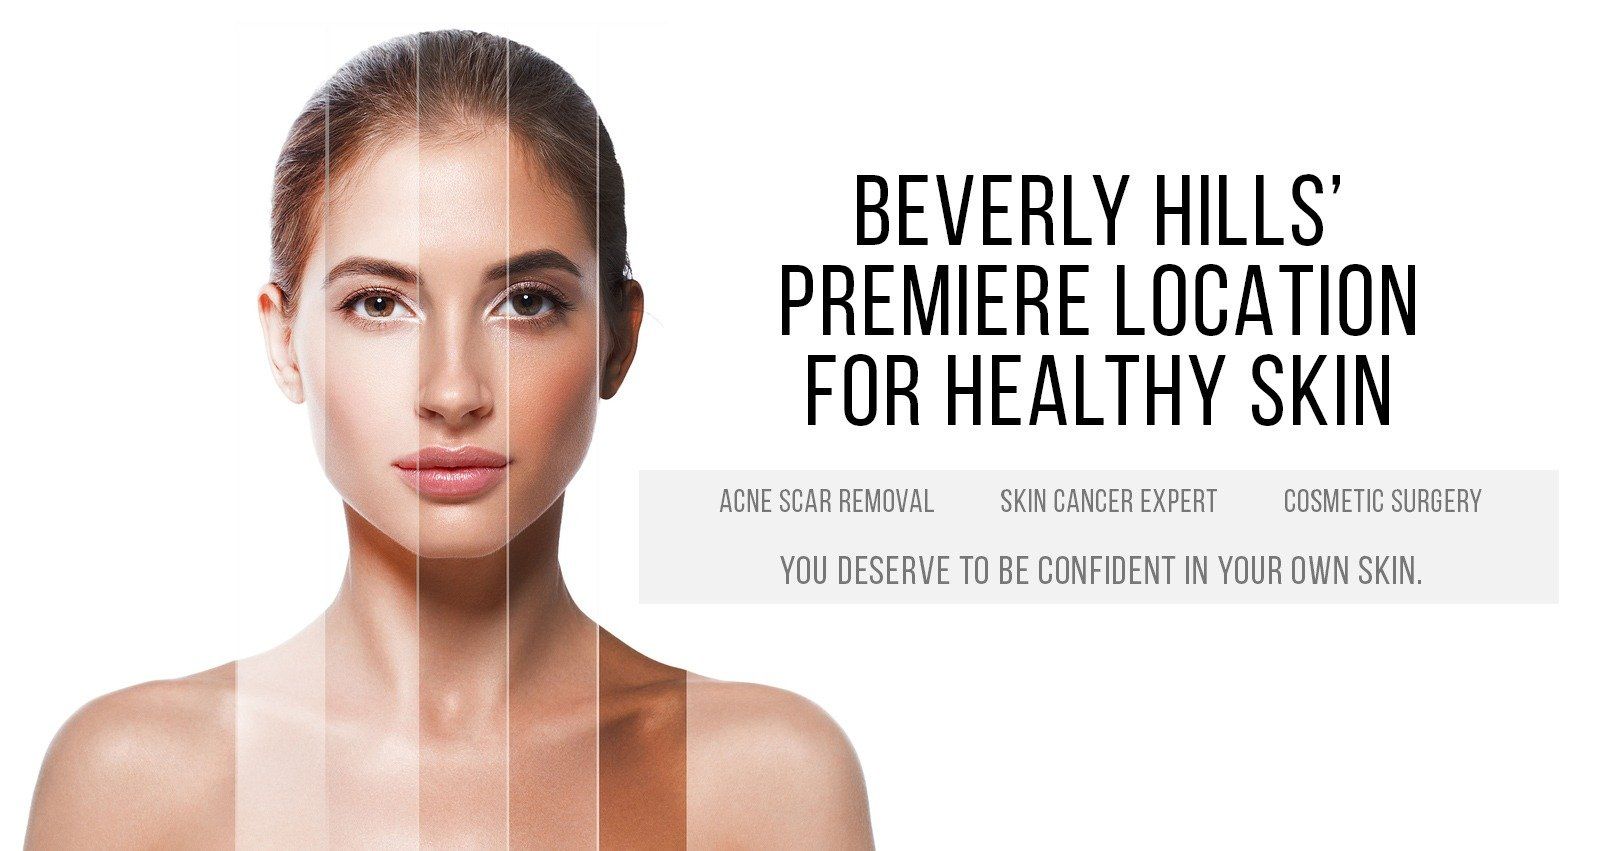 Beverly Hills' Premiere Location for Healthy Skin - Acne Scar Removal, Skin Cancer Specialist, Cosmetic Surgery